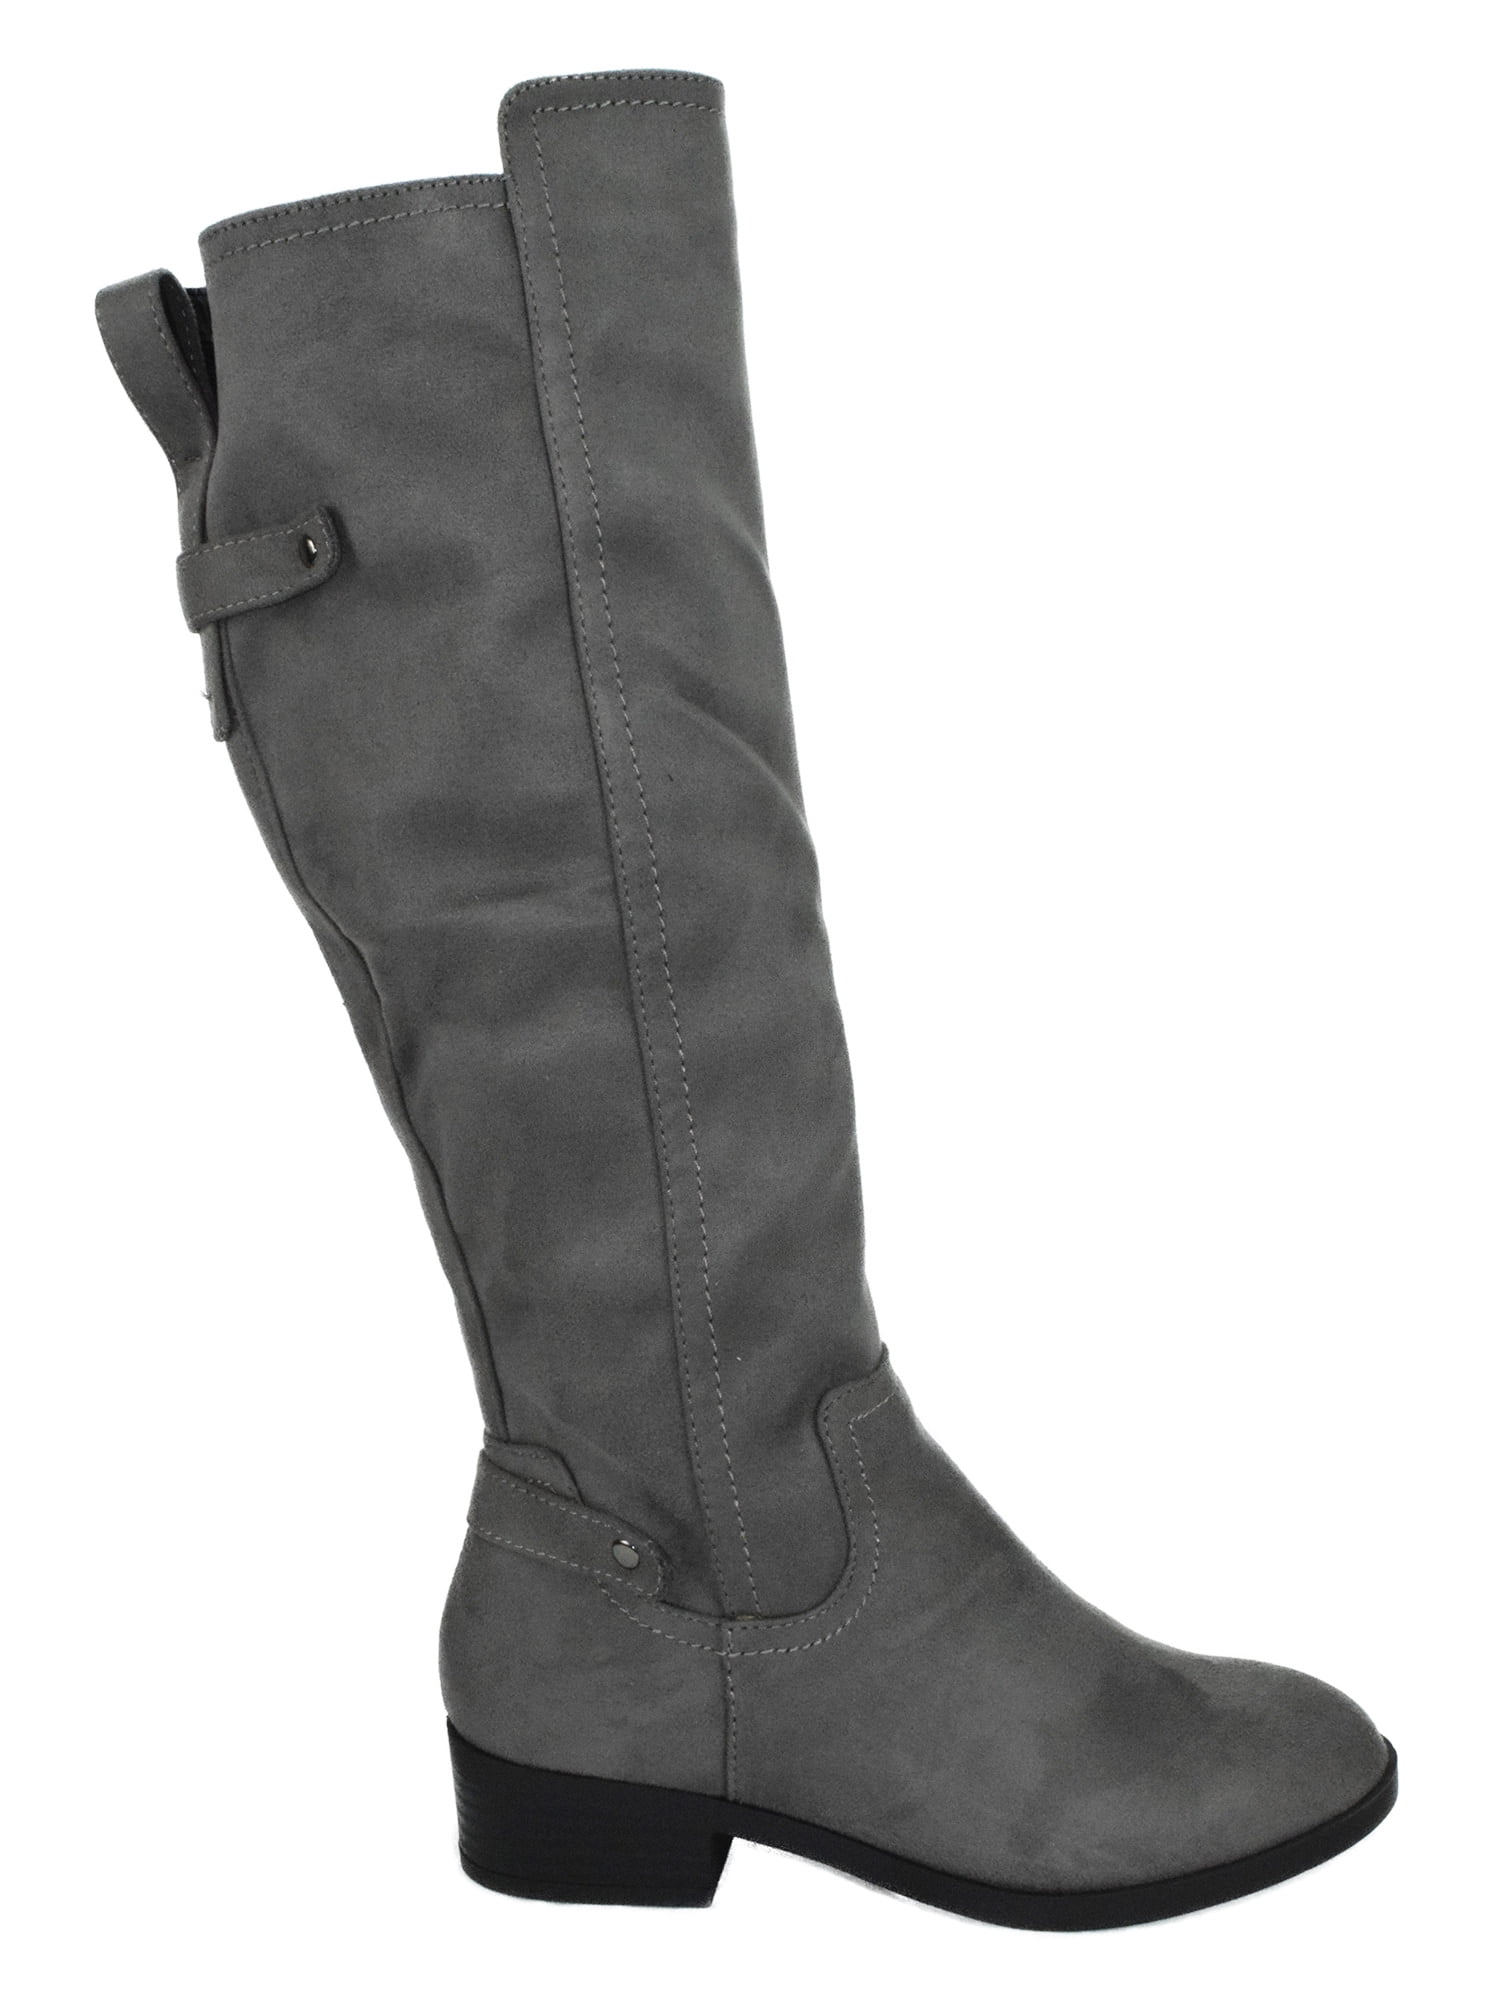 gray suede riding boots